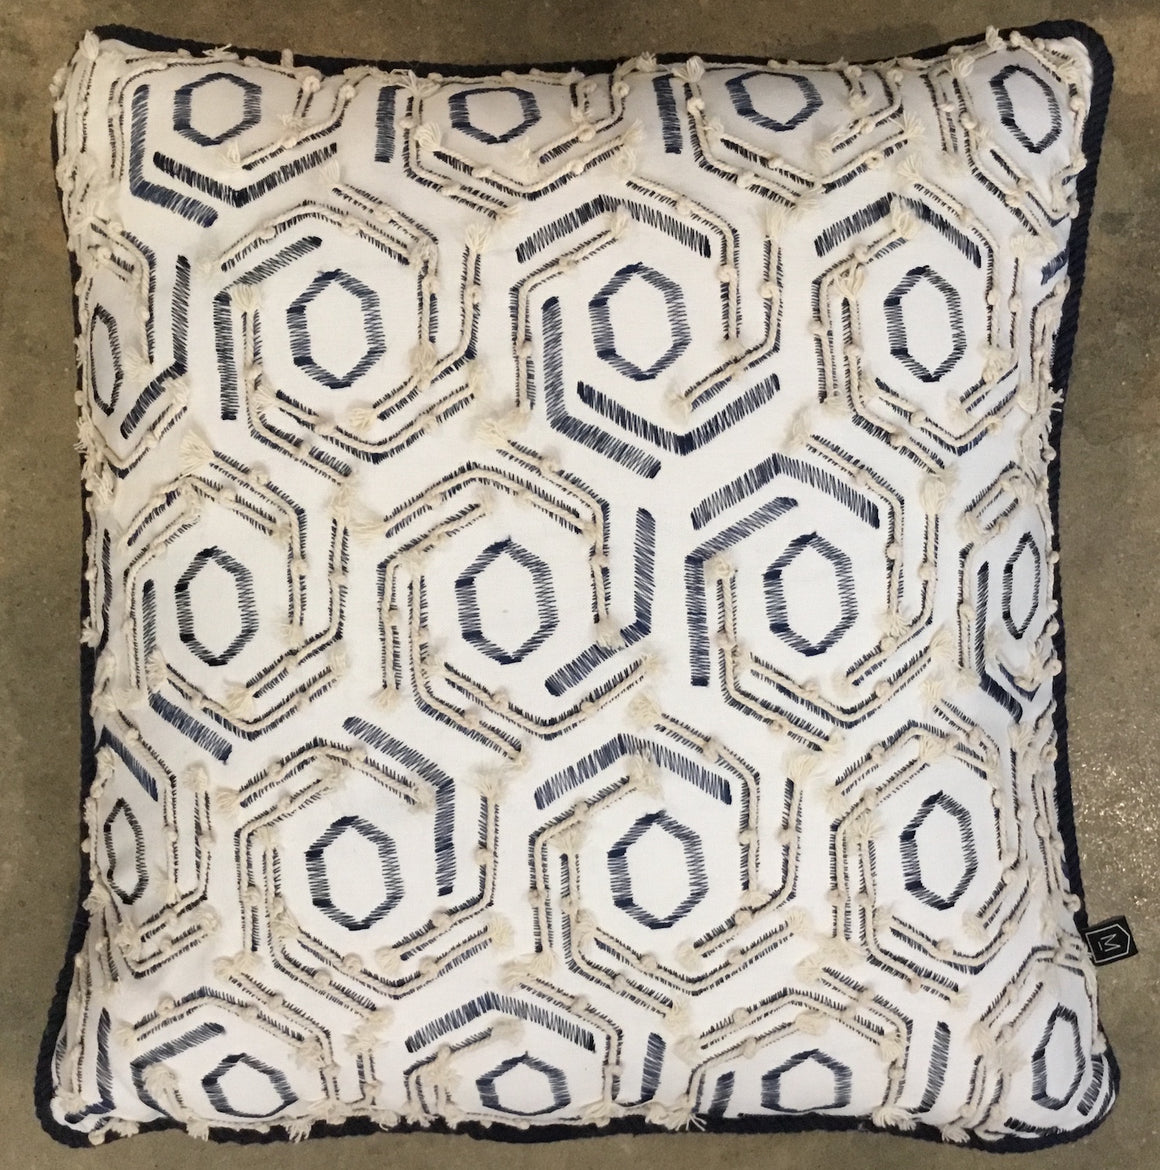 Textured Navy & White Cushion with Rope Detail and Piping